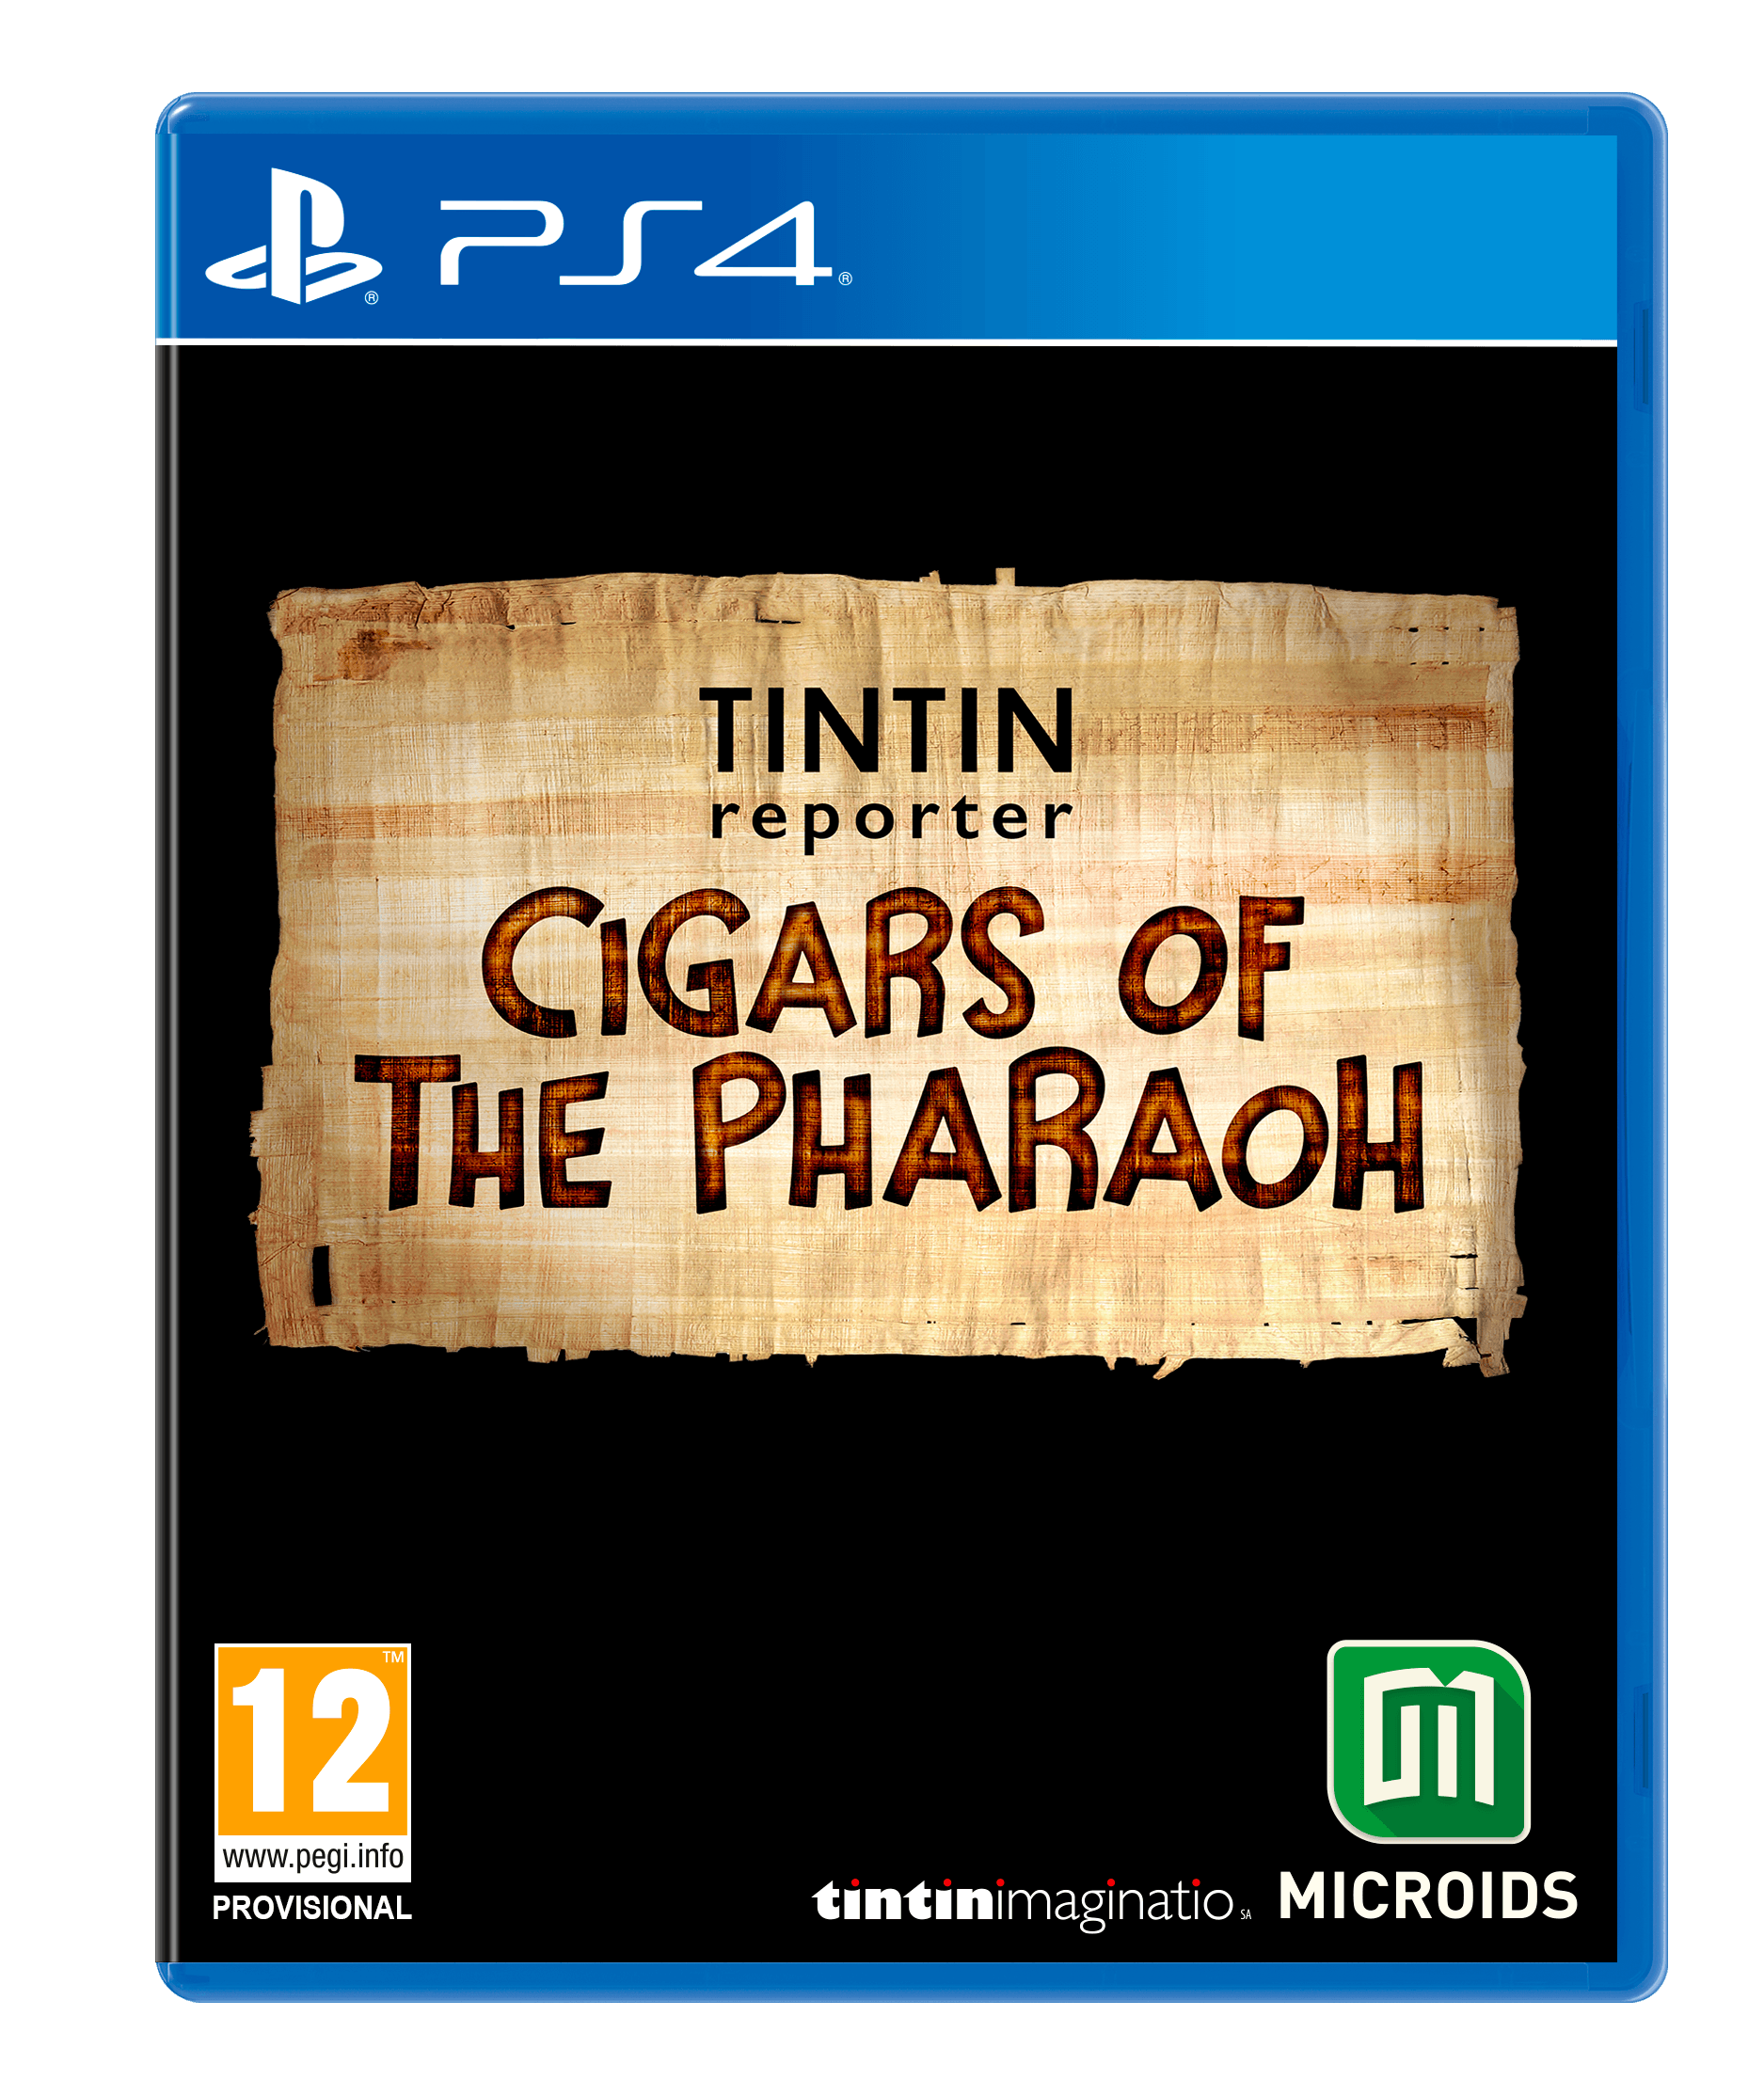 PlayStation 4 - Tintin Reporter: Cigars of the Pharaoh - Limited Edition - Want a New Gadget